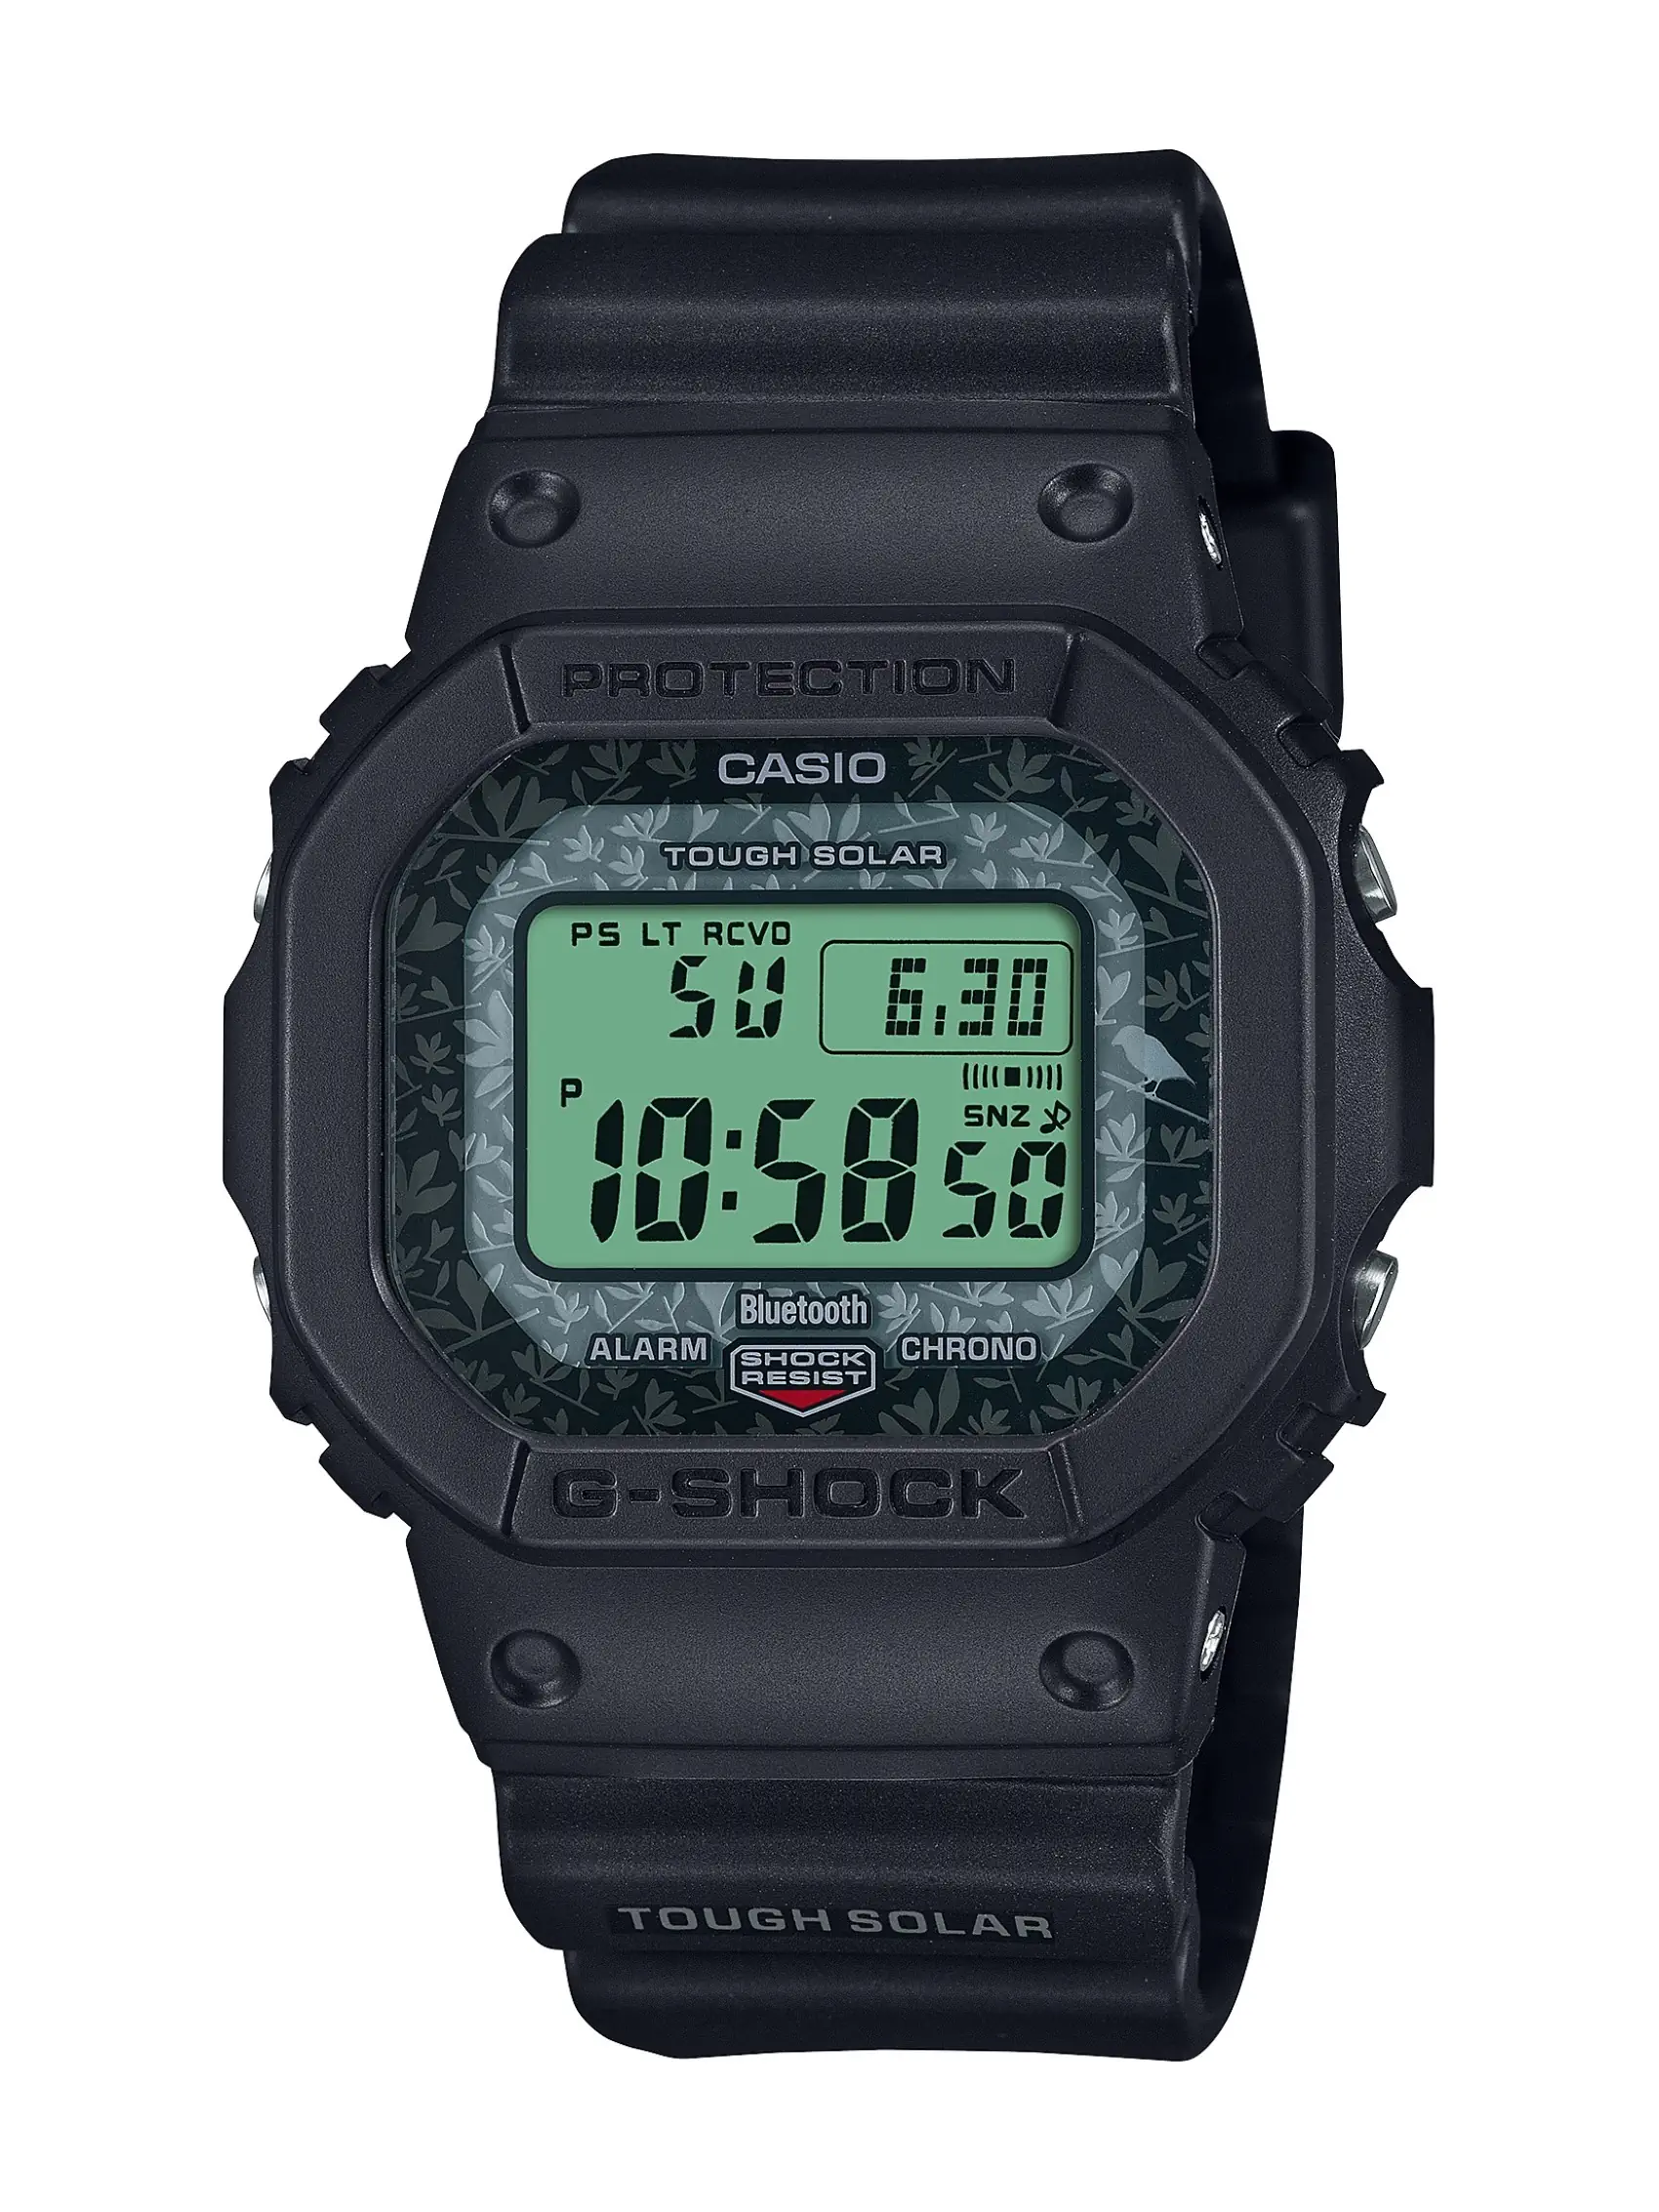 G-SHOCK Goes Wild: A Galapagos Odyssey on Your Wrist